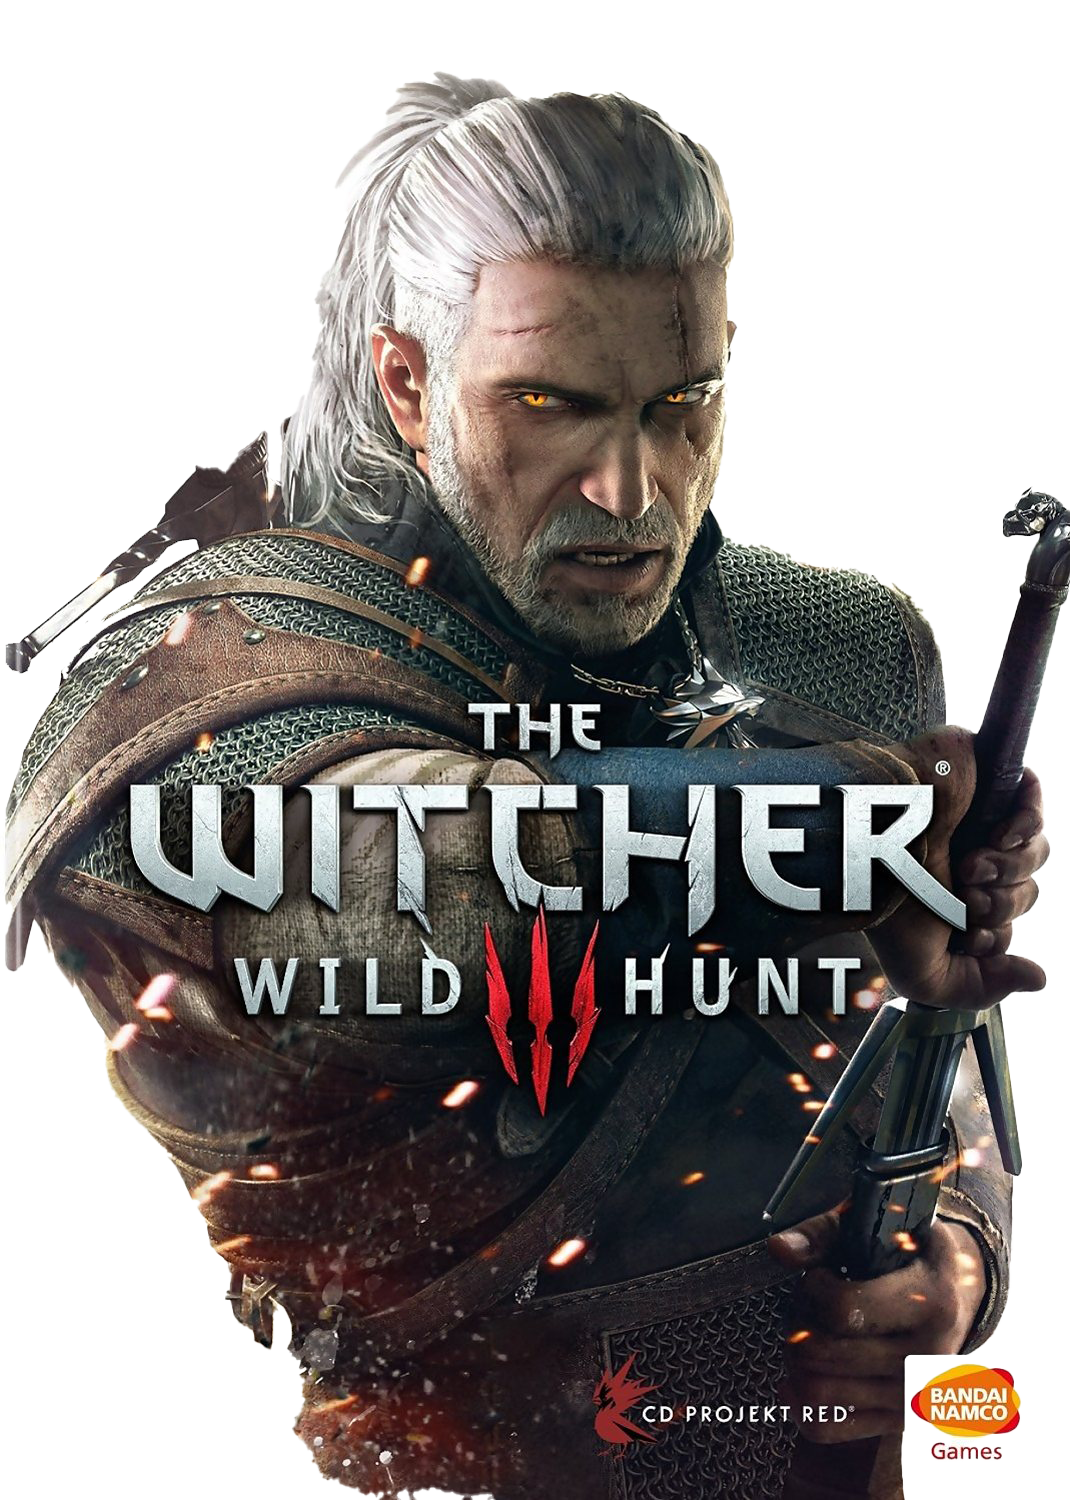 The Witcher Game PNG HD Image